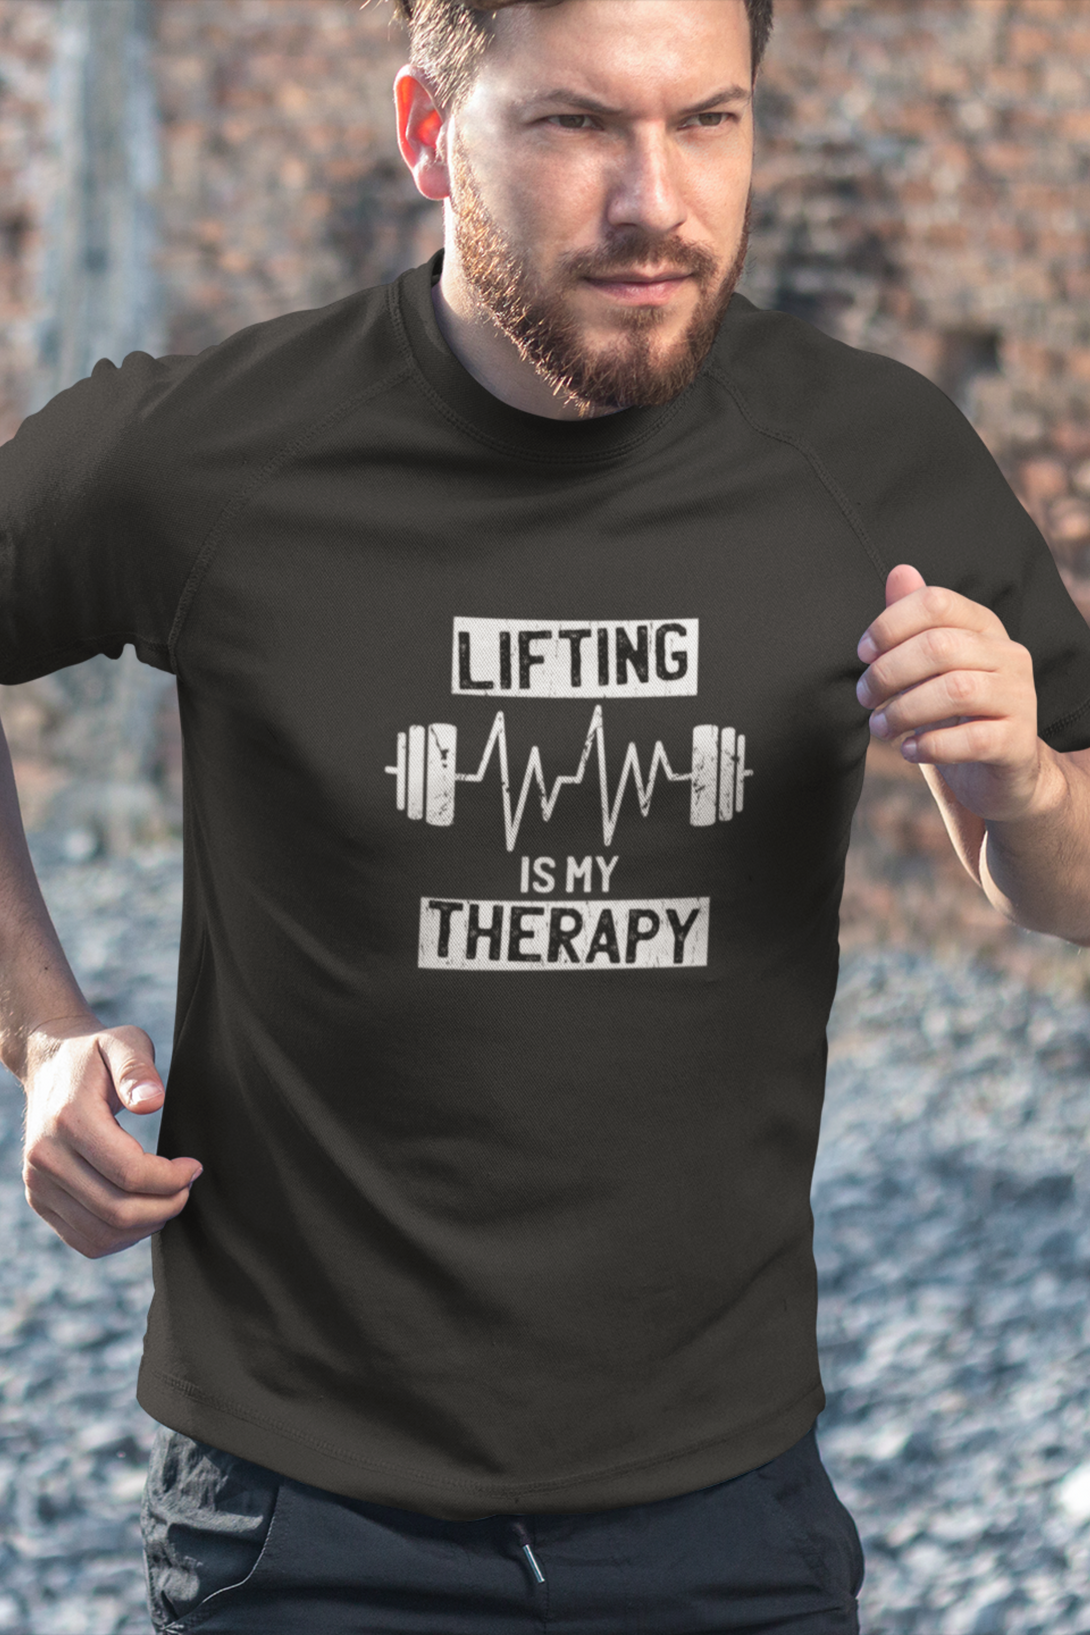 Lifting Is My Therapy Printed T-Shirt For Men - WowWaves - 2